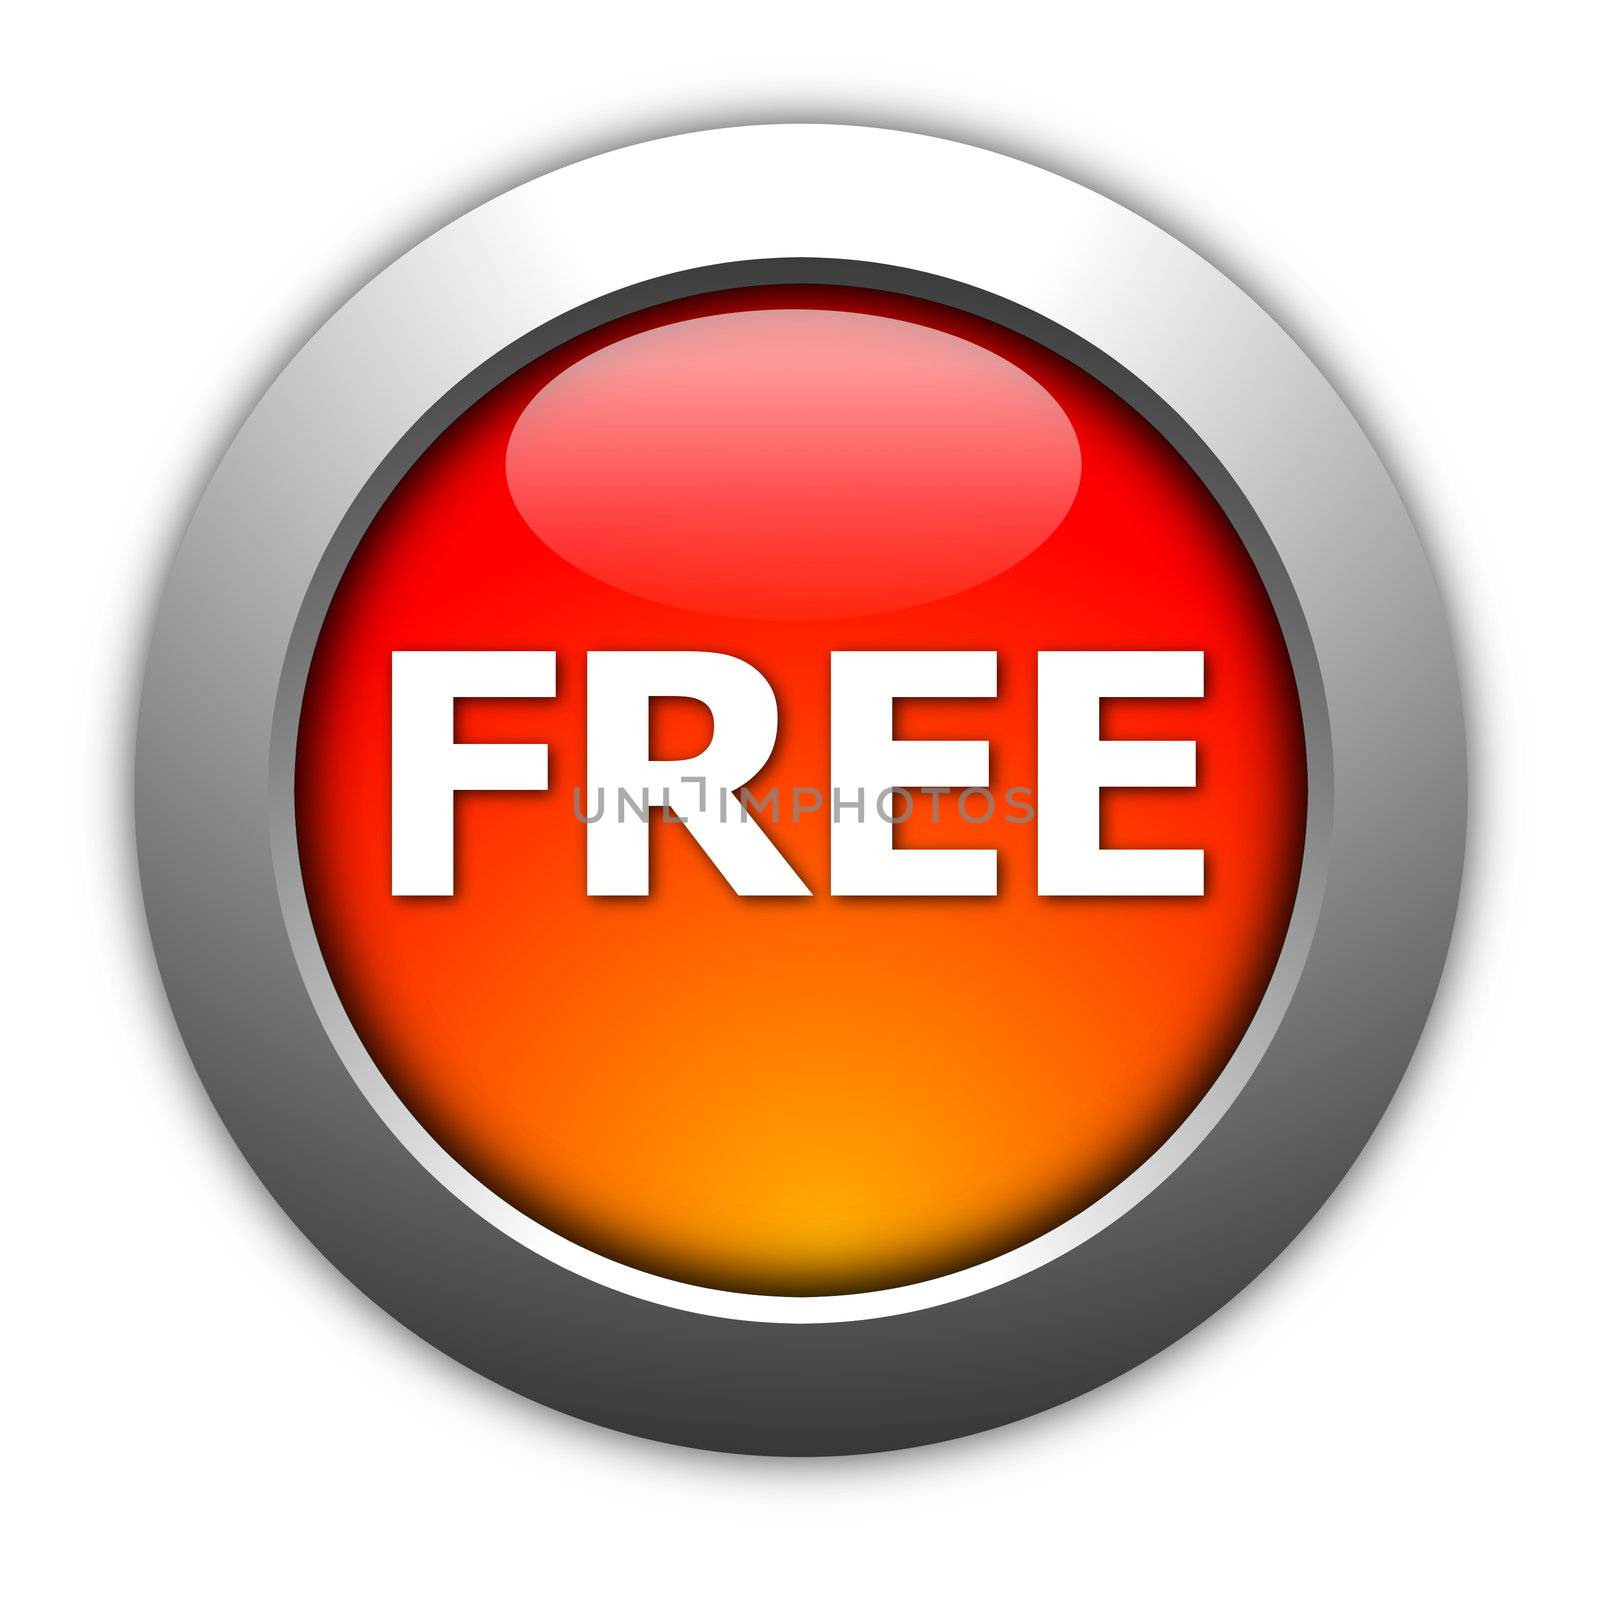 glossy free button illustration isolated on white